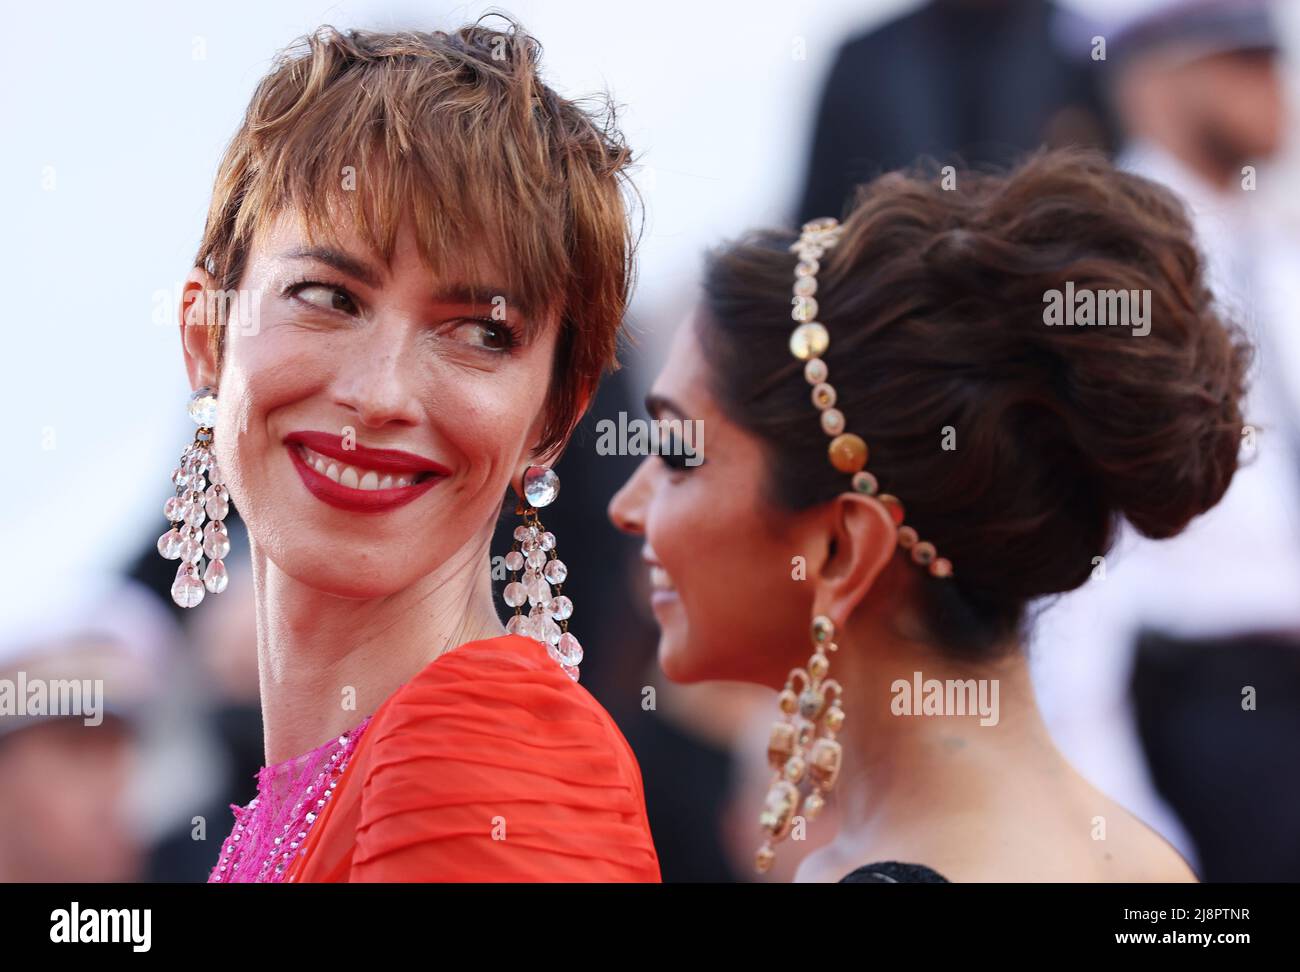 Cannes, France. 17th May, 2022. Jury members Rebecca Hall (L) and Deepika Padukone arrive ahead of the opening ceremony of the 75th edition of the Cannes Film Festival in Cannes, southern France, on May 17, 2022. The 75th edition of the Cannes Film Festival kicked off here on Tuesday. Credit: Gao Jing/Xinhua/Alamy Live News Stock Photo